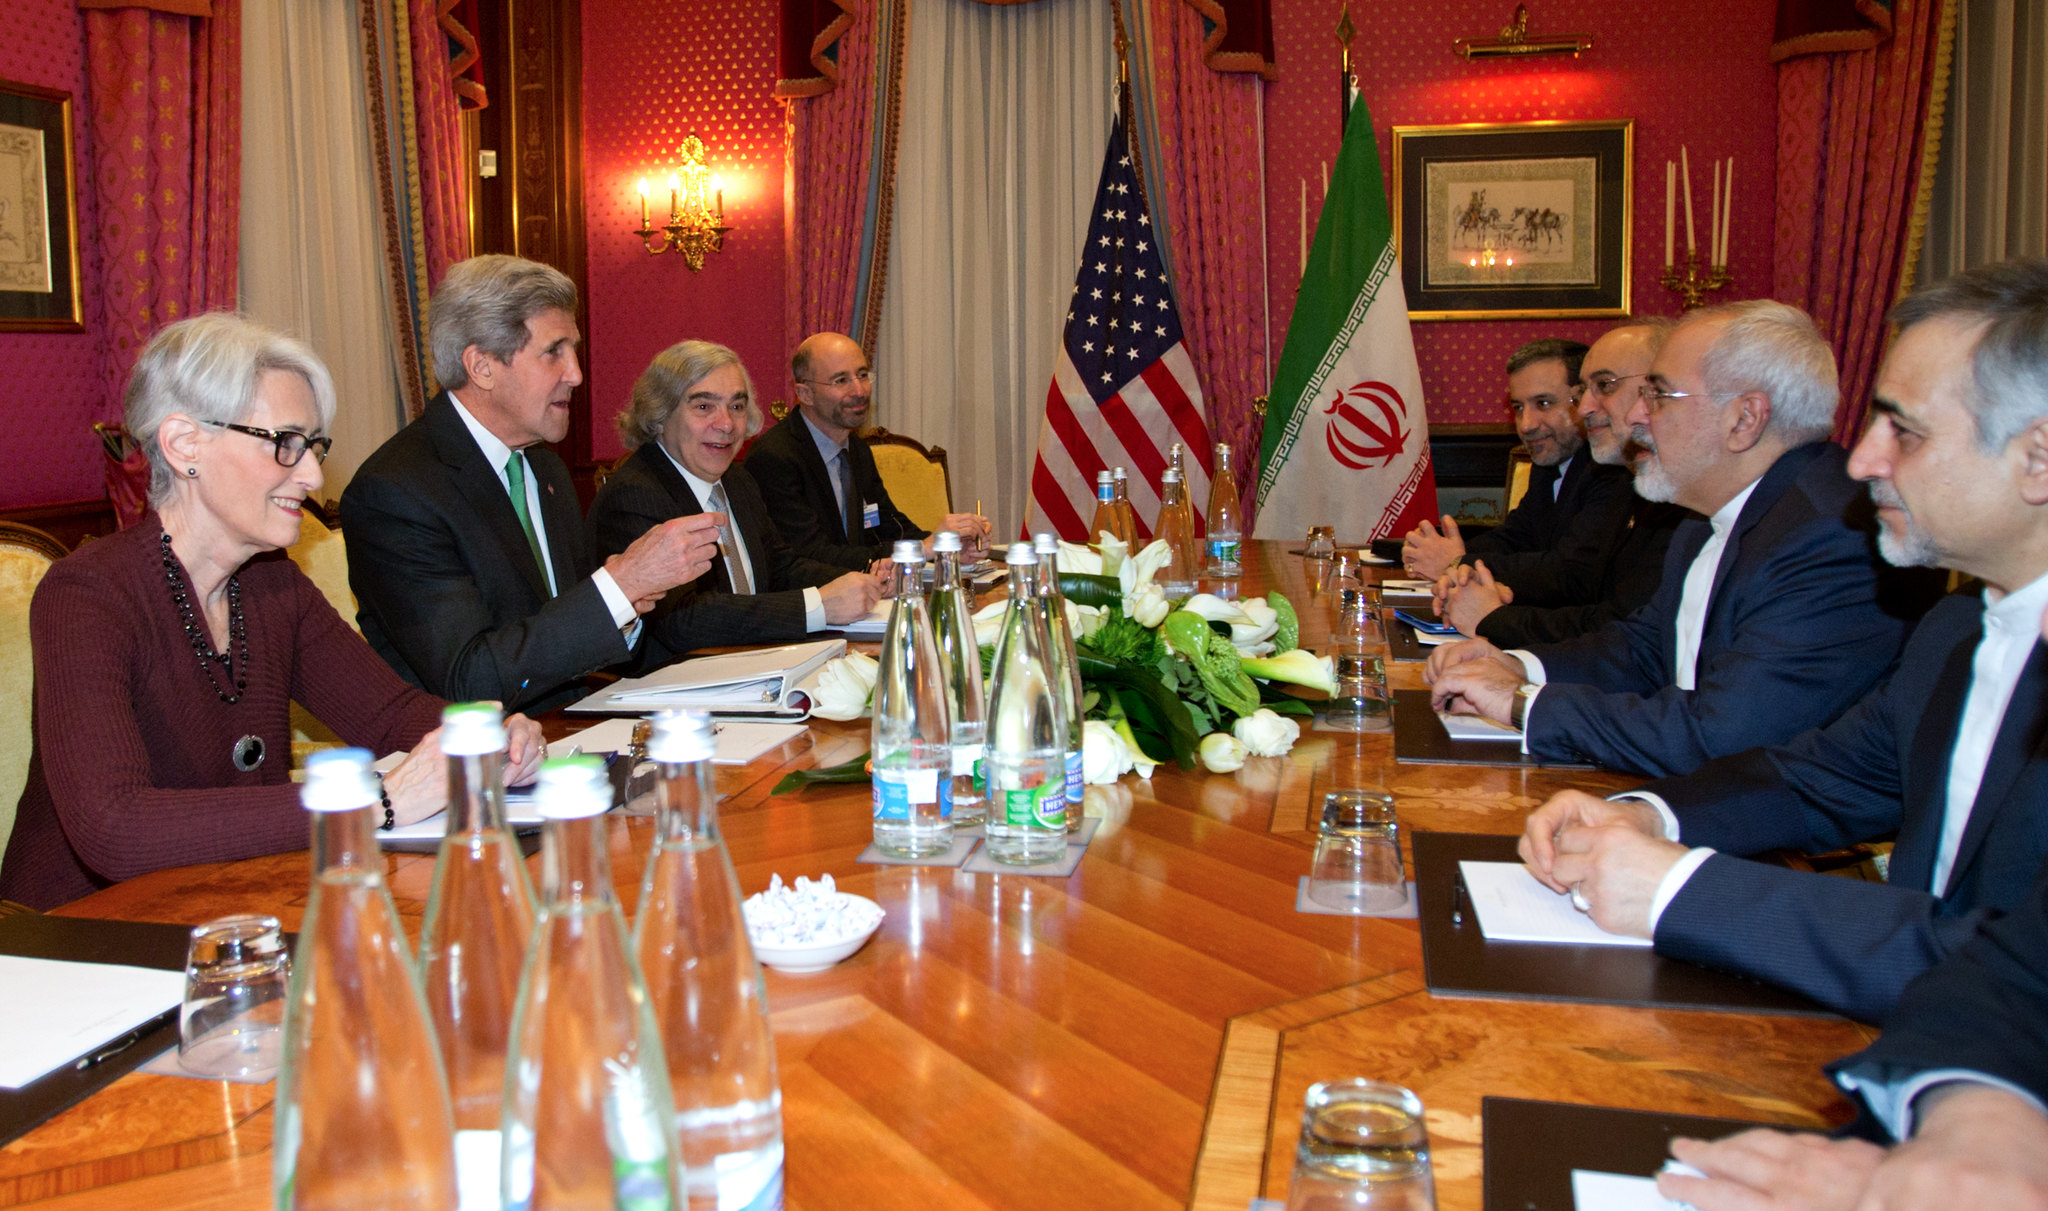 Secretary of State John Kerry continued his meetings in Lausanne with Iranian Foreign Minister Zarif. Under Secretary Wendy Sherman and Energy Secretary Ernest Moniz are participating in the meetings.